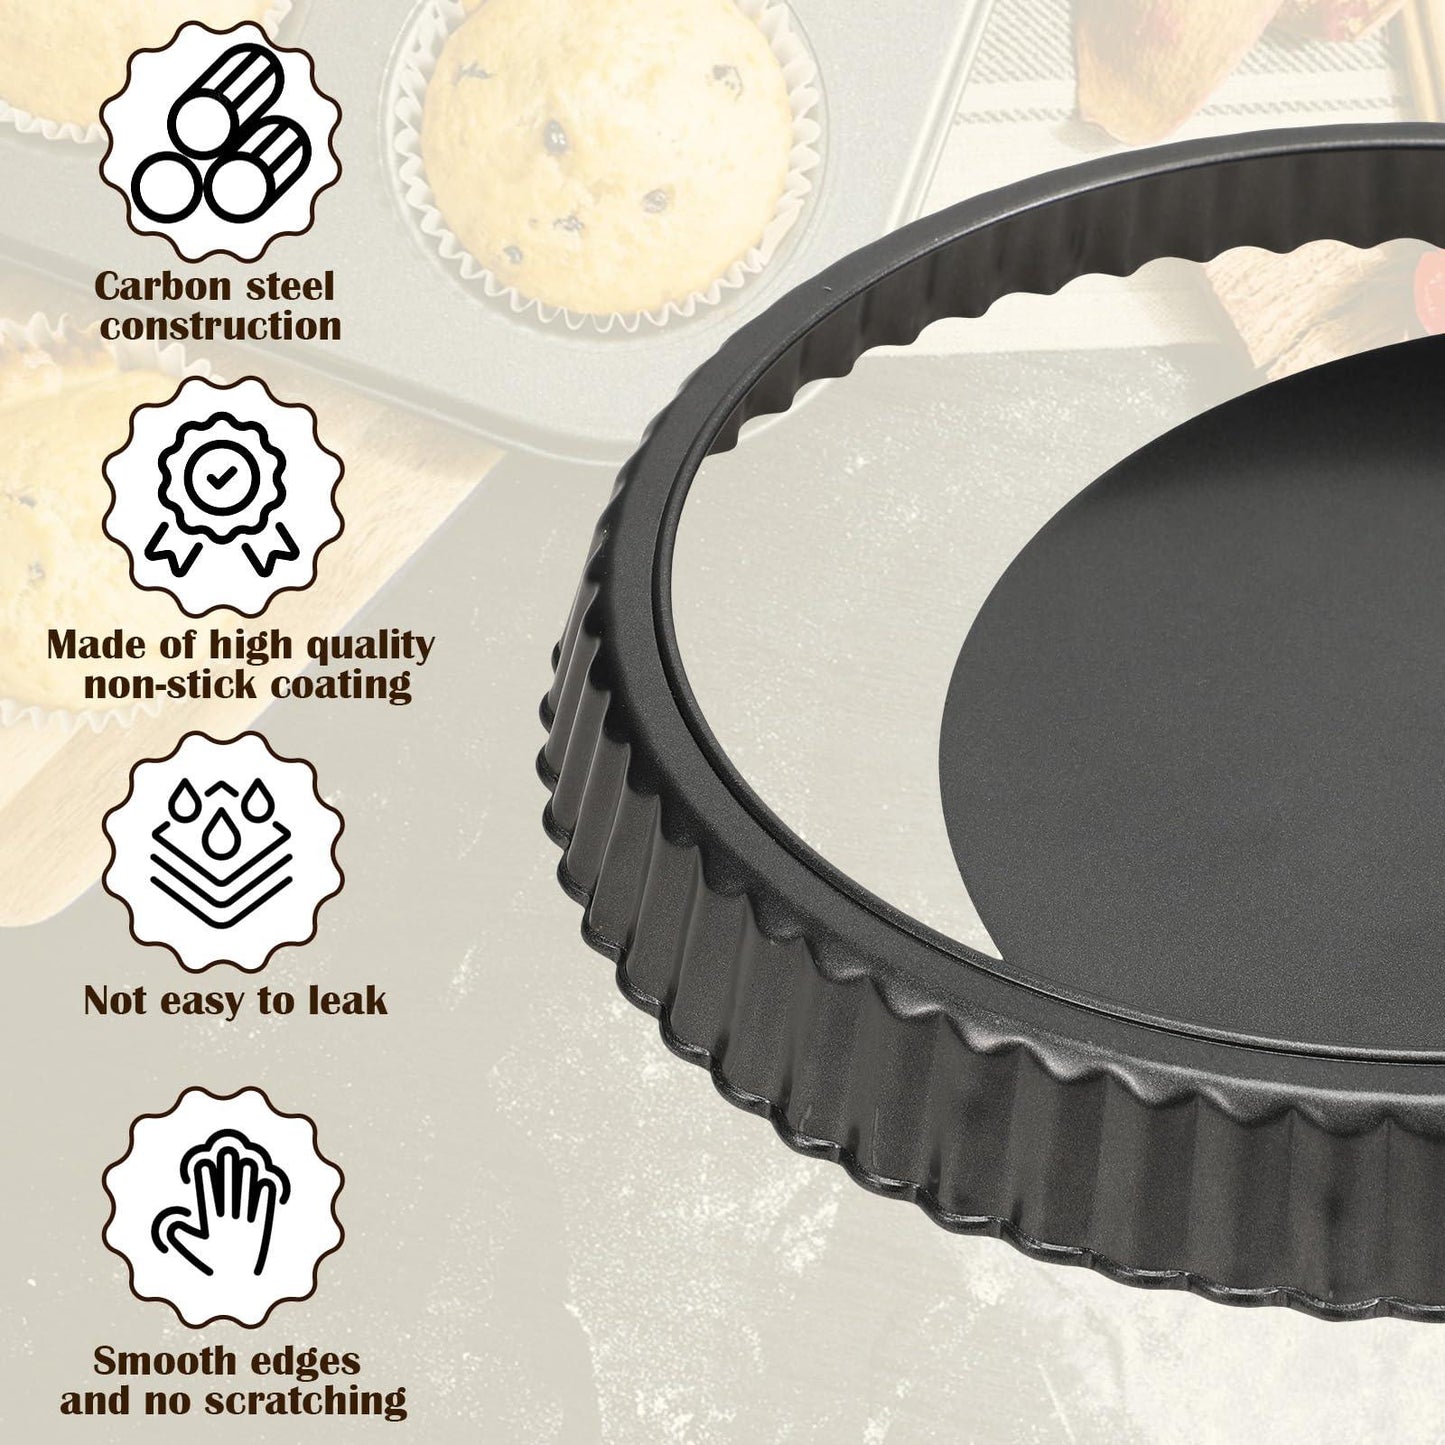 Sunnychicc 9 Inch Round Tart Pan Set 2 Pcs Tart Pans Loose Removable Bottom Non-Stick Carbon Steel with 50 Parchment Sheets and Reusable 1.2 lb Baking Beans Ceramic Pie Weights - CookCave